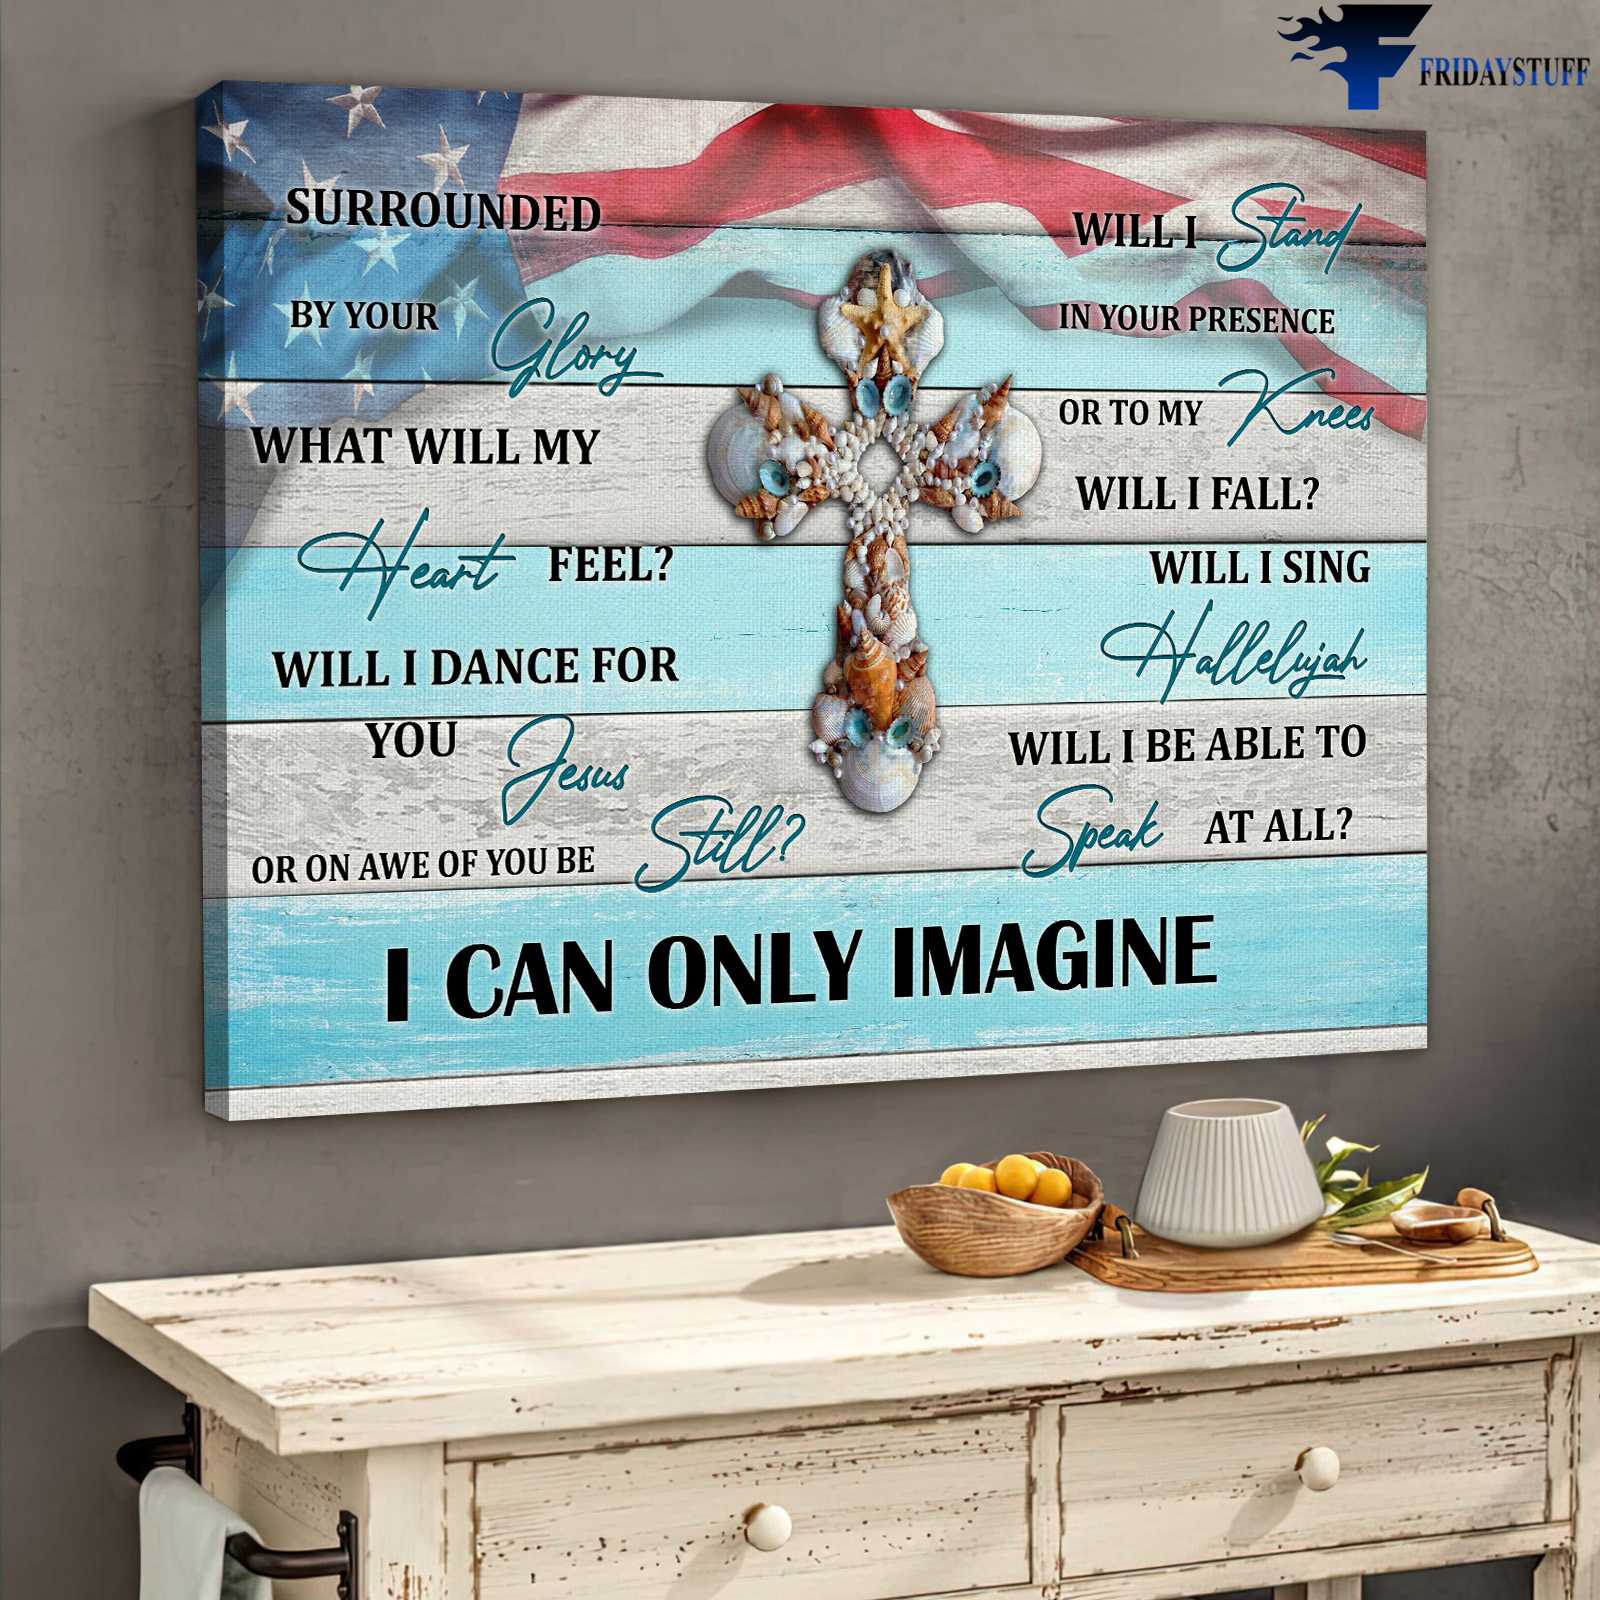 America God Cross - I Can Only Imagine, Surrounded By Your Glory, What Will My Heart Feel, Will I Dance For You, Jesus, Or In Awe Of You Be Still, Will I Stand In Your Presence, Or To My Kness Will I Fall